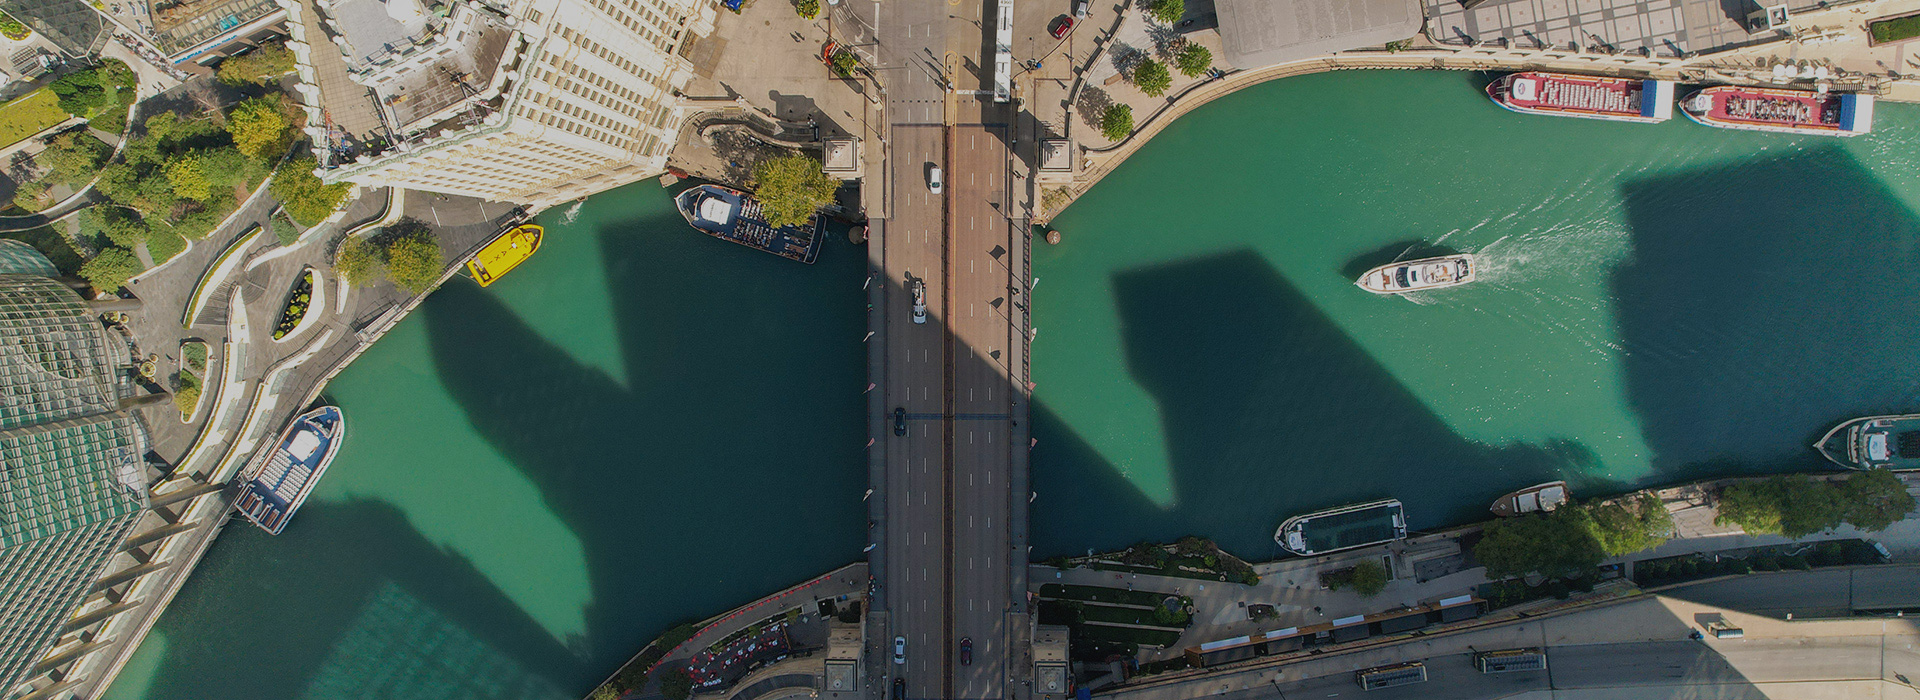 Overhead view of the Chicago river and Michigan avenue